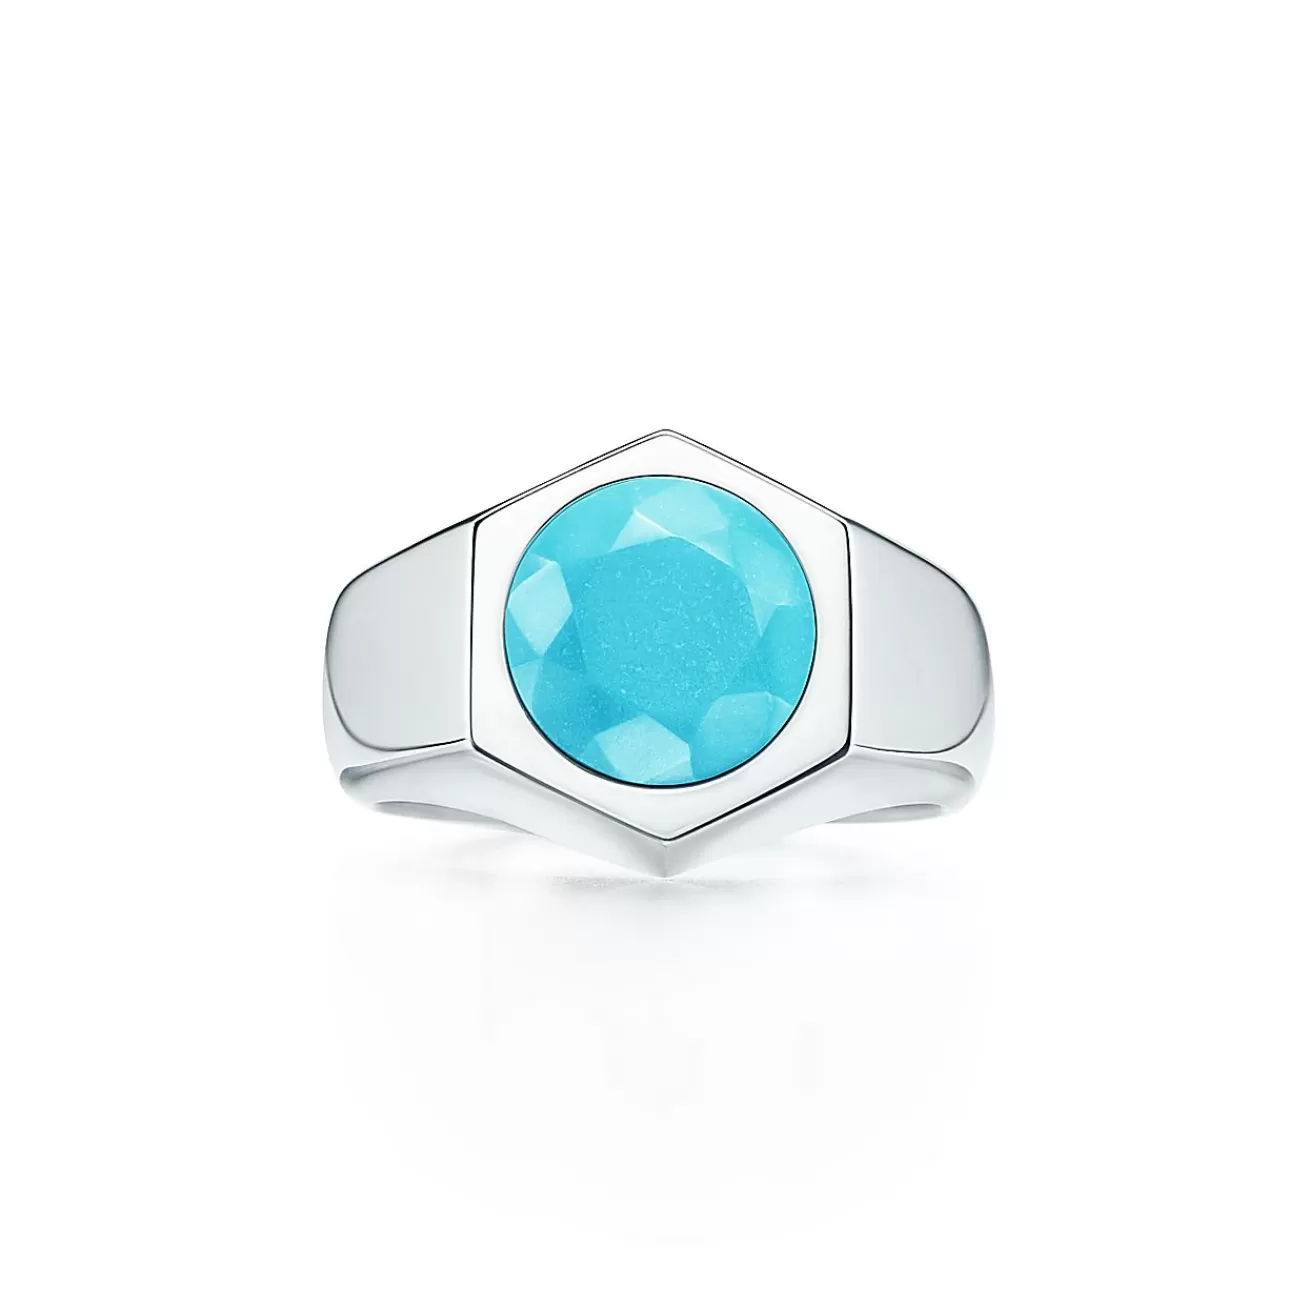 Tiffany & Co. Elsa Peretti® Esagono ring in sterling silver with turquoise. | ^ Rings | Sterling Silver Jewelry